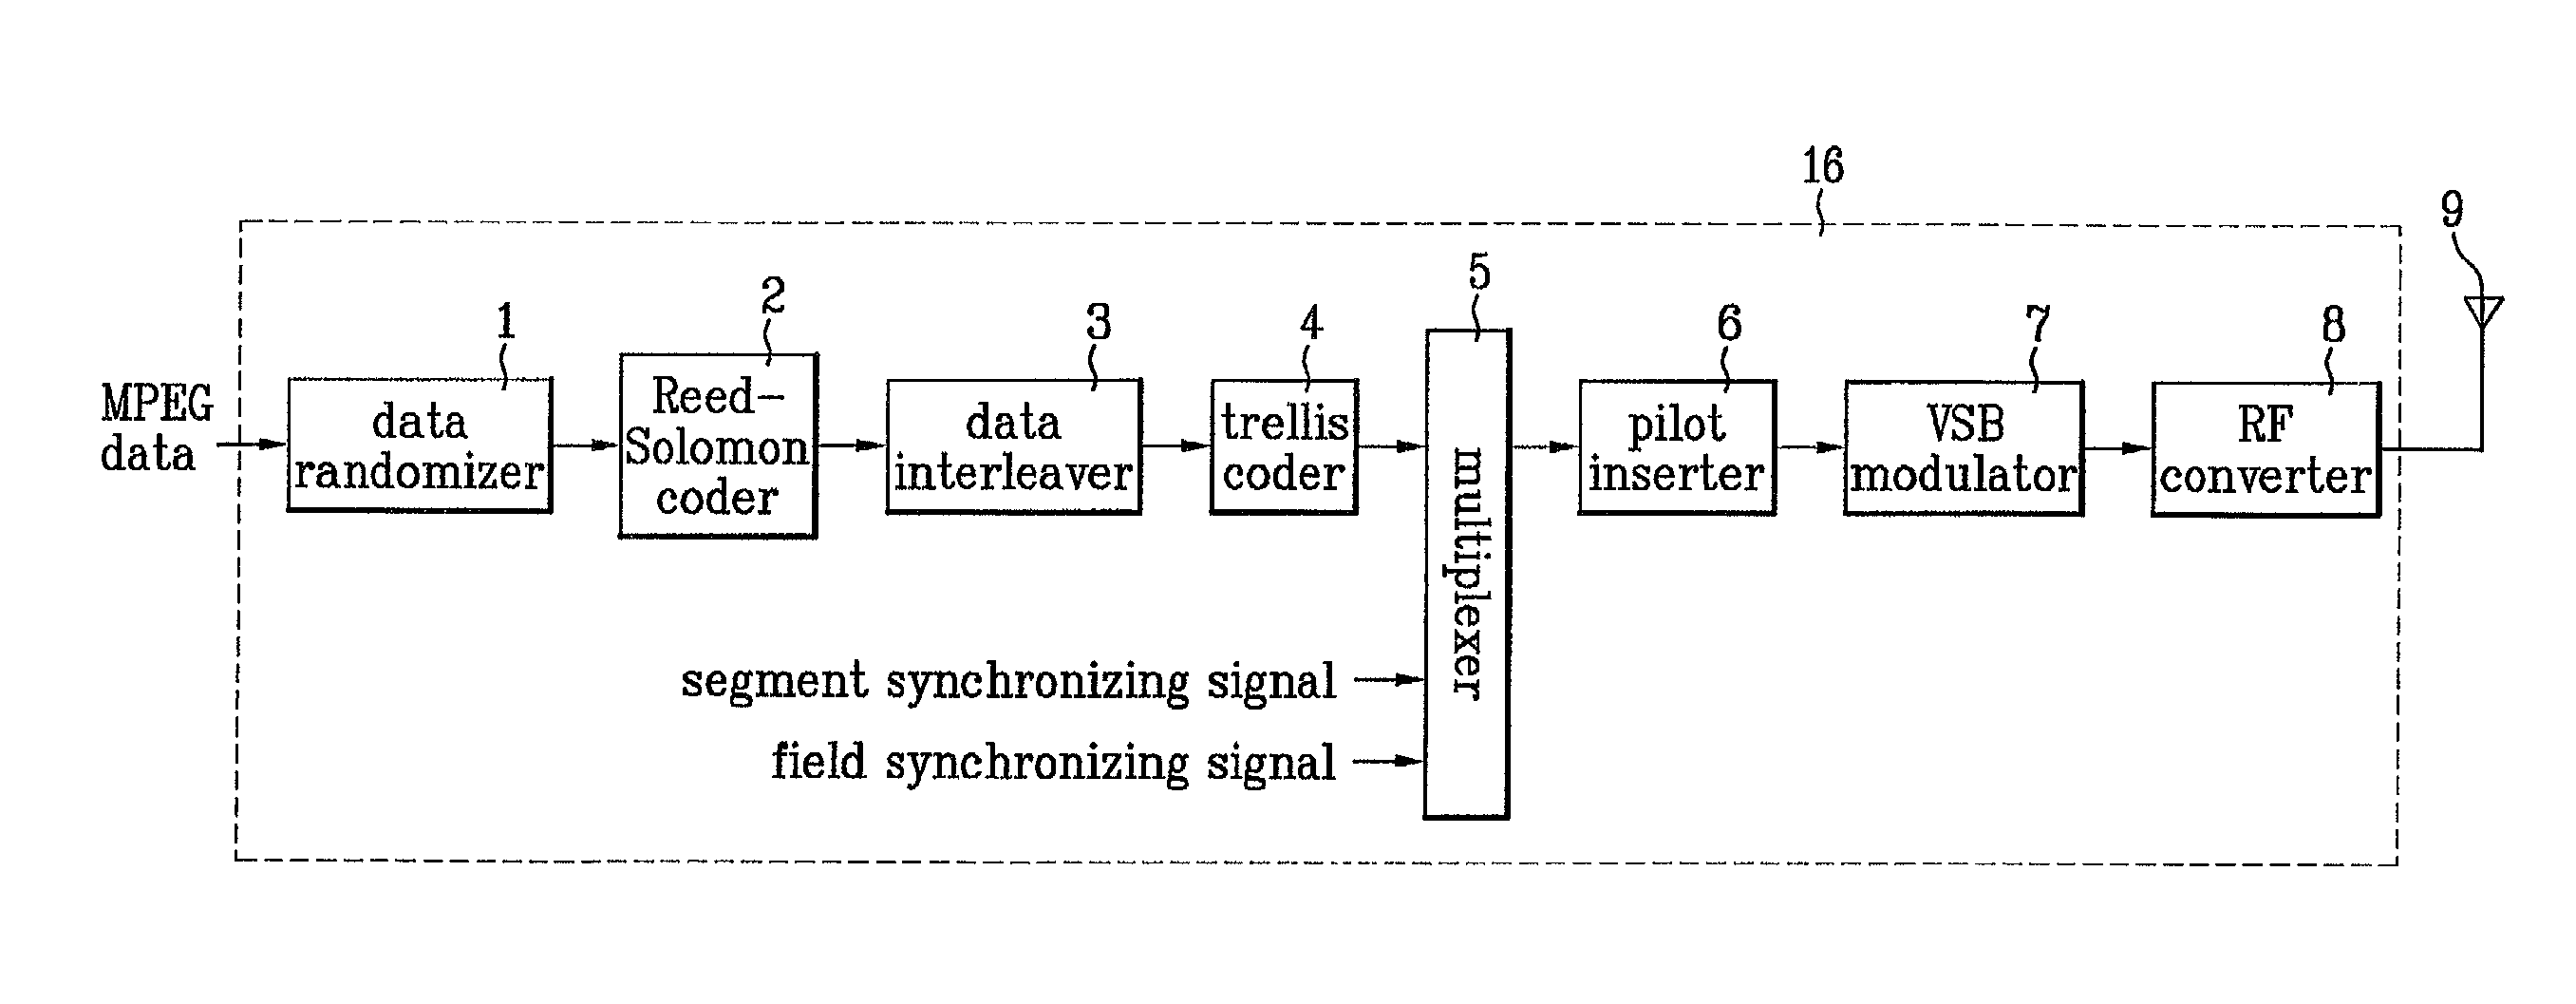 Communication system in digital television